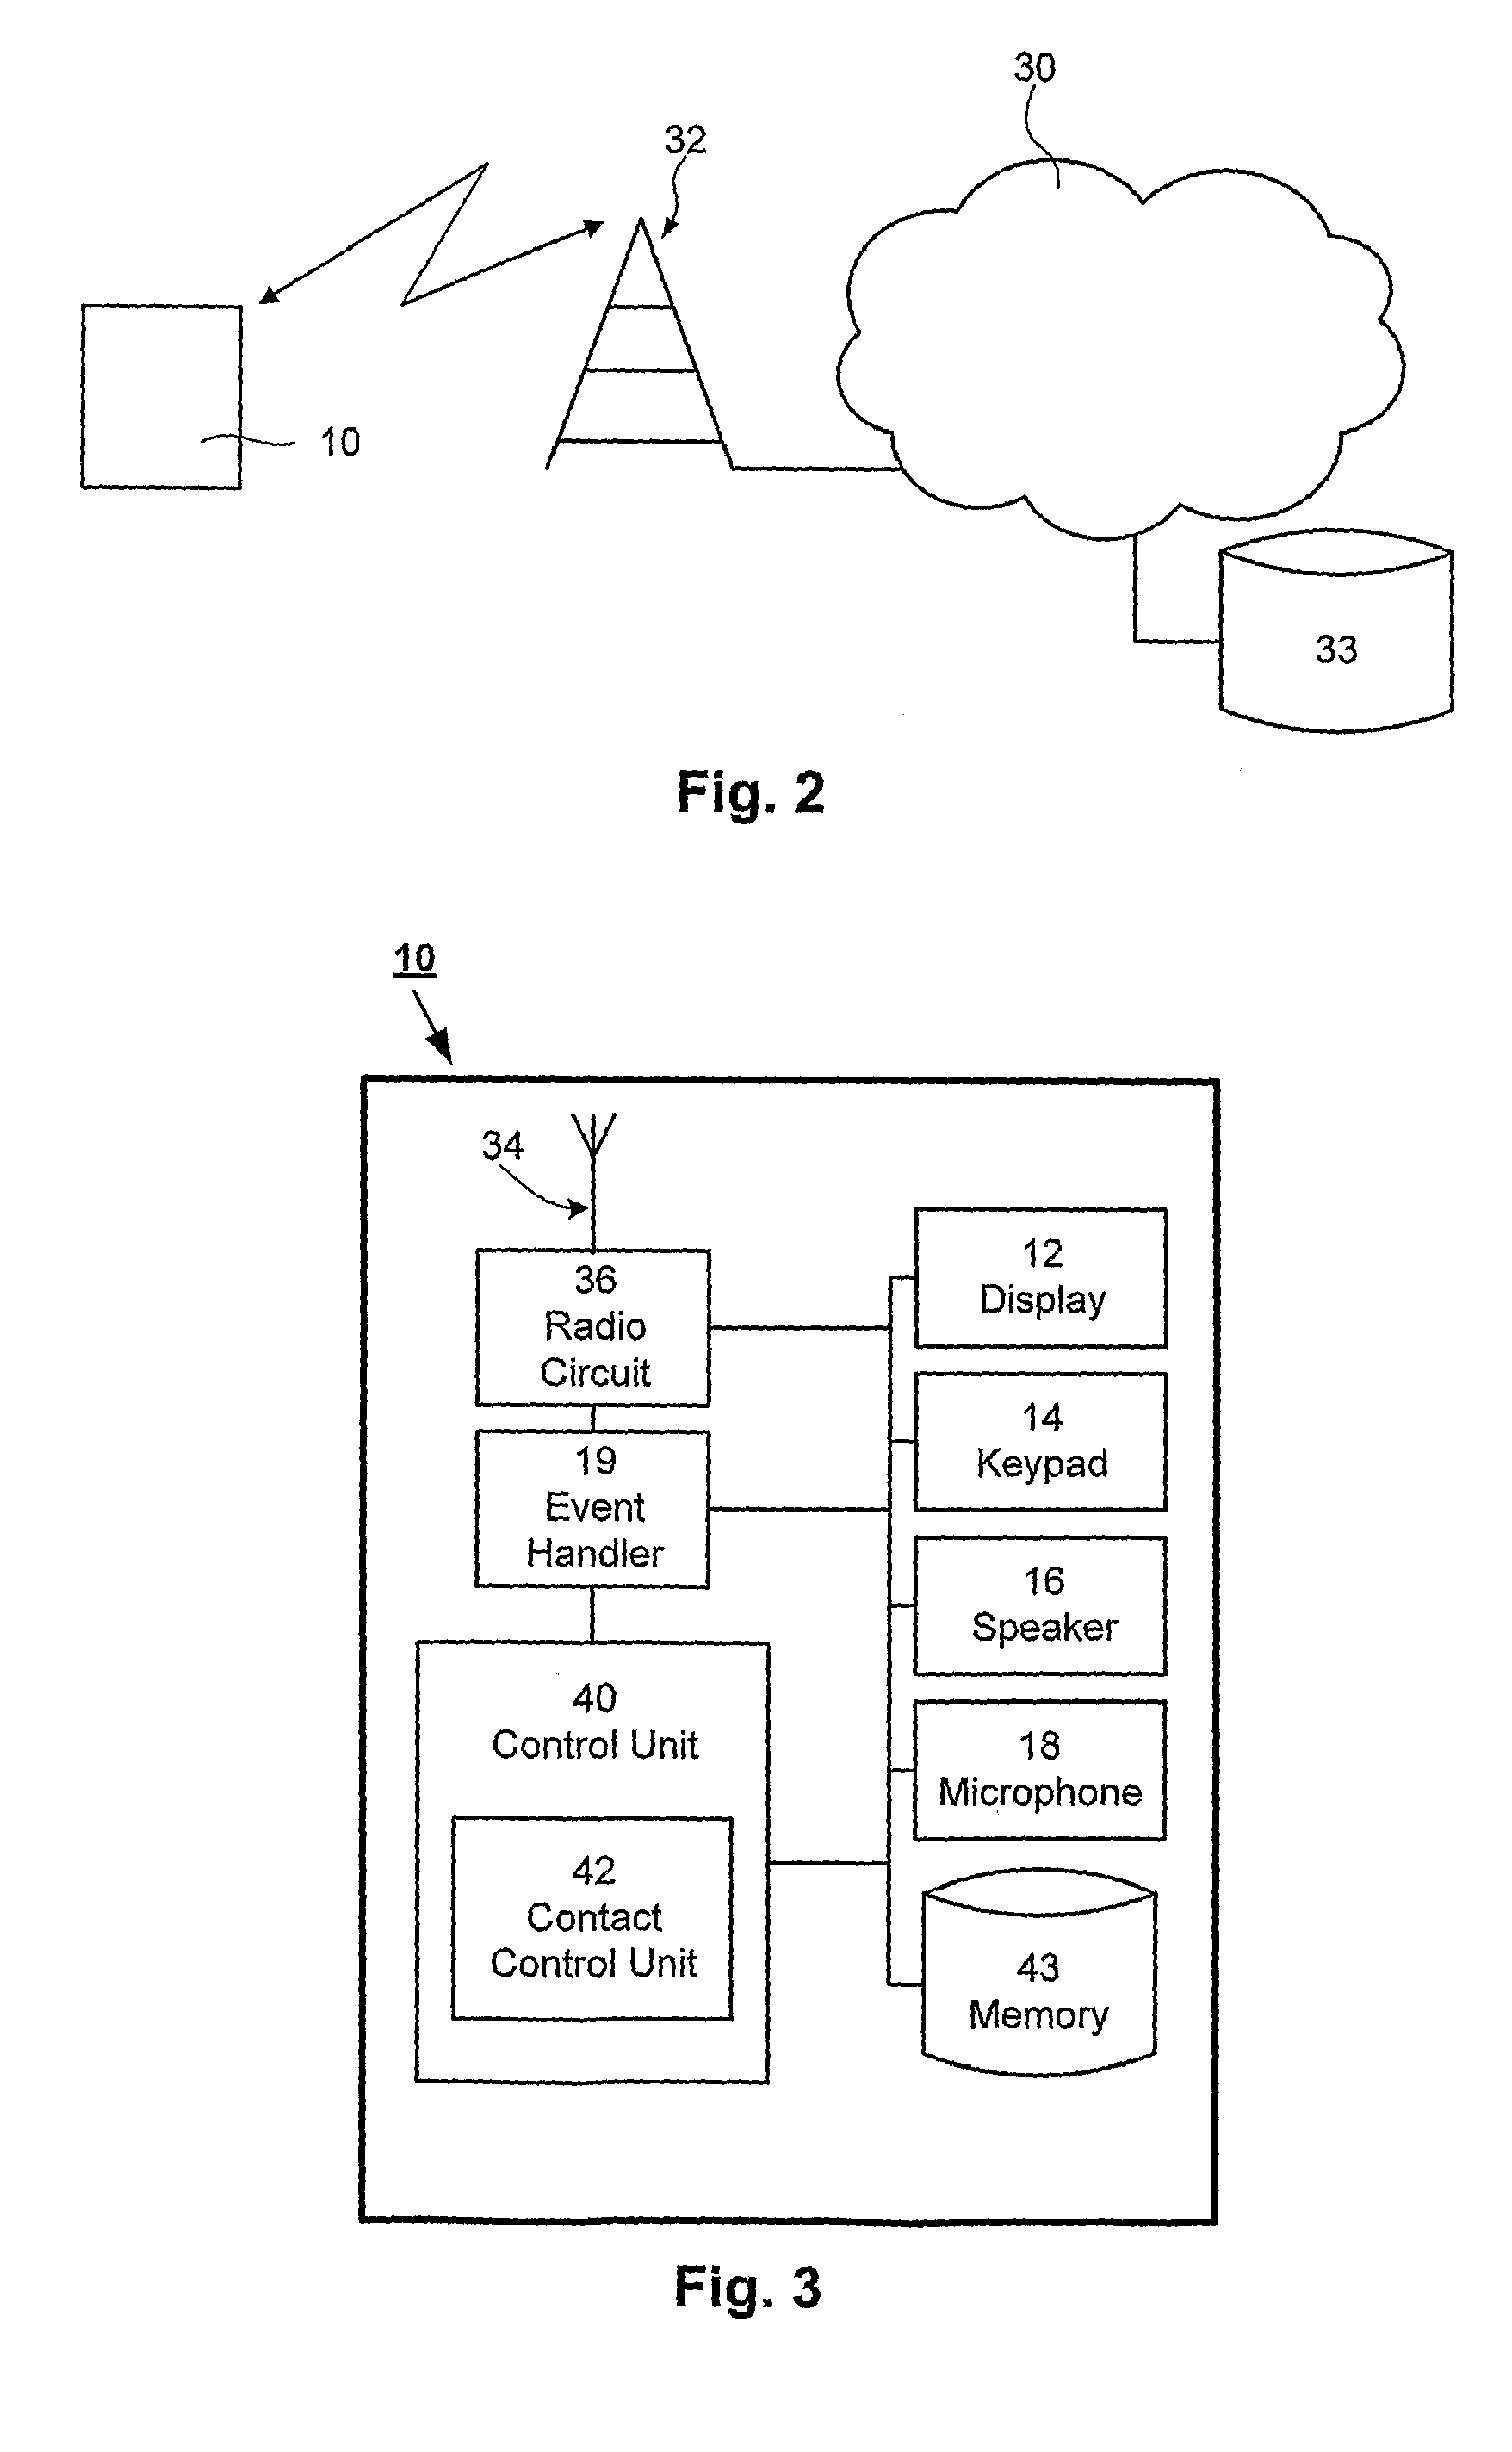 Retreiving and presenting information in a portable device